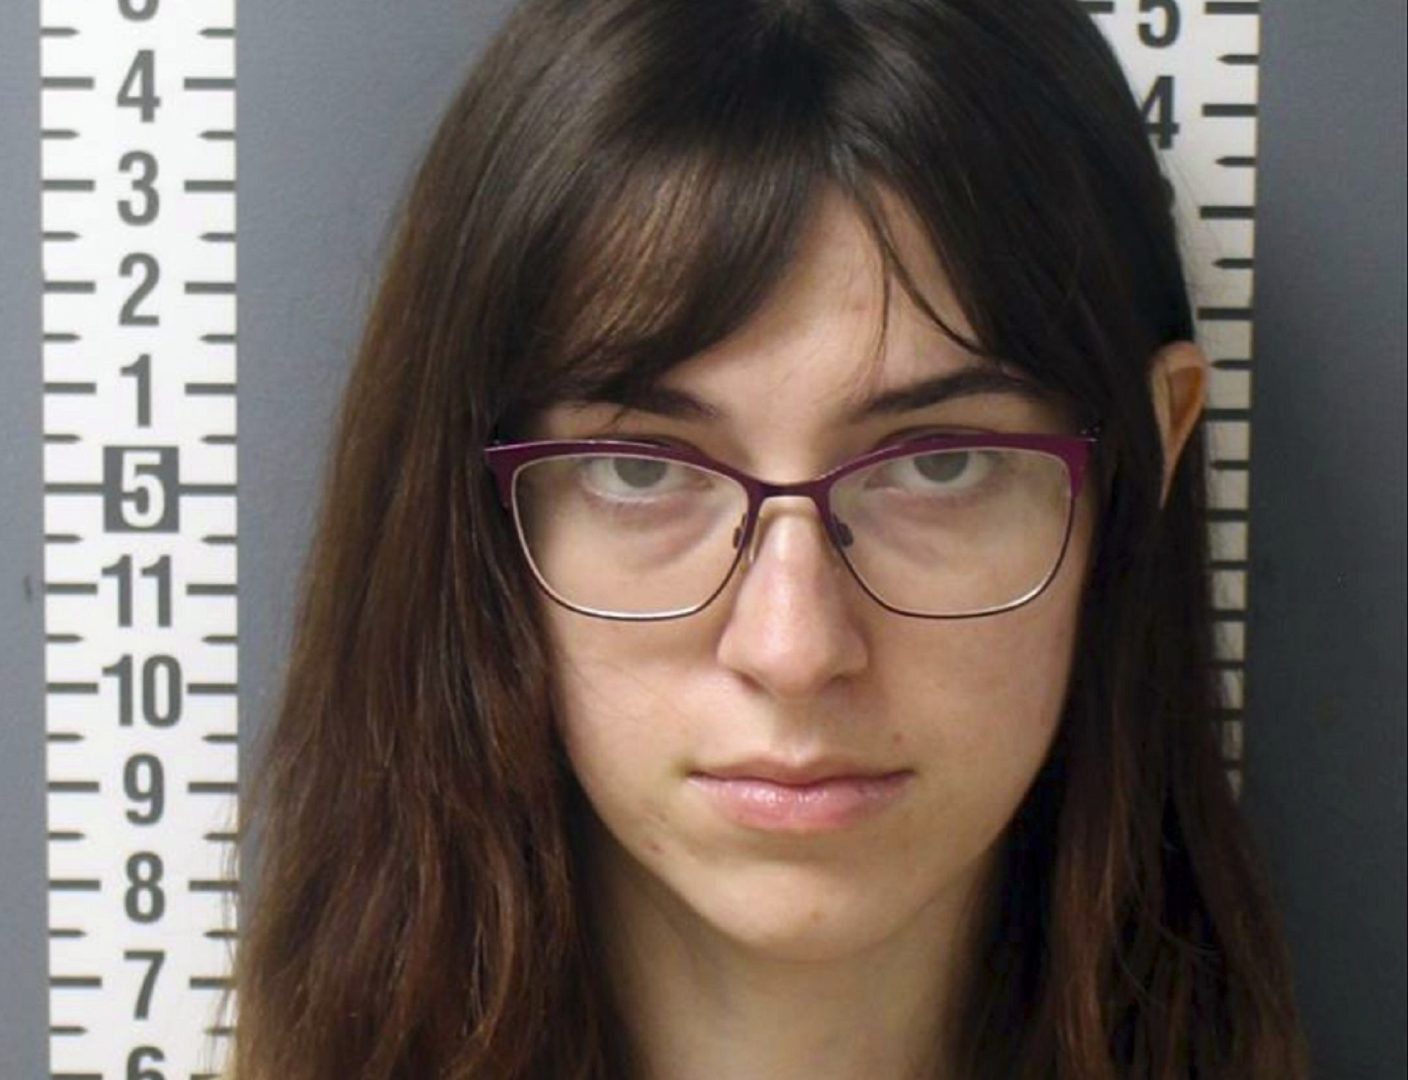 This booking photo provided by the Dauphin County, Pa., Prison, shows Riley June Williams. Federal authorities on Monday, Jan. 18, 2021, arrested Williams, whose former romantic partner says she took a laptop from House Speaker Nancy Pelosi’s office during the riot at the U.S. Capitol earlier this month. (Dauphin County Prison via AP)